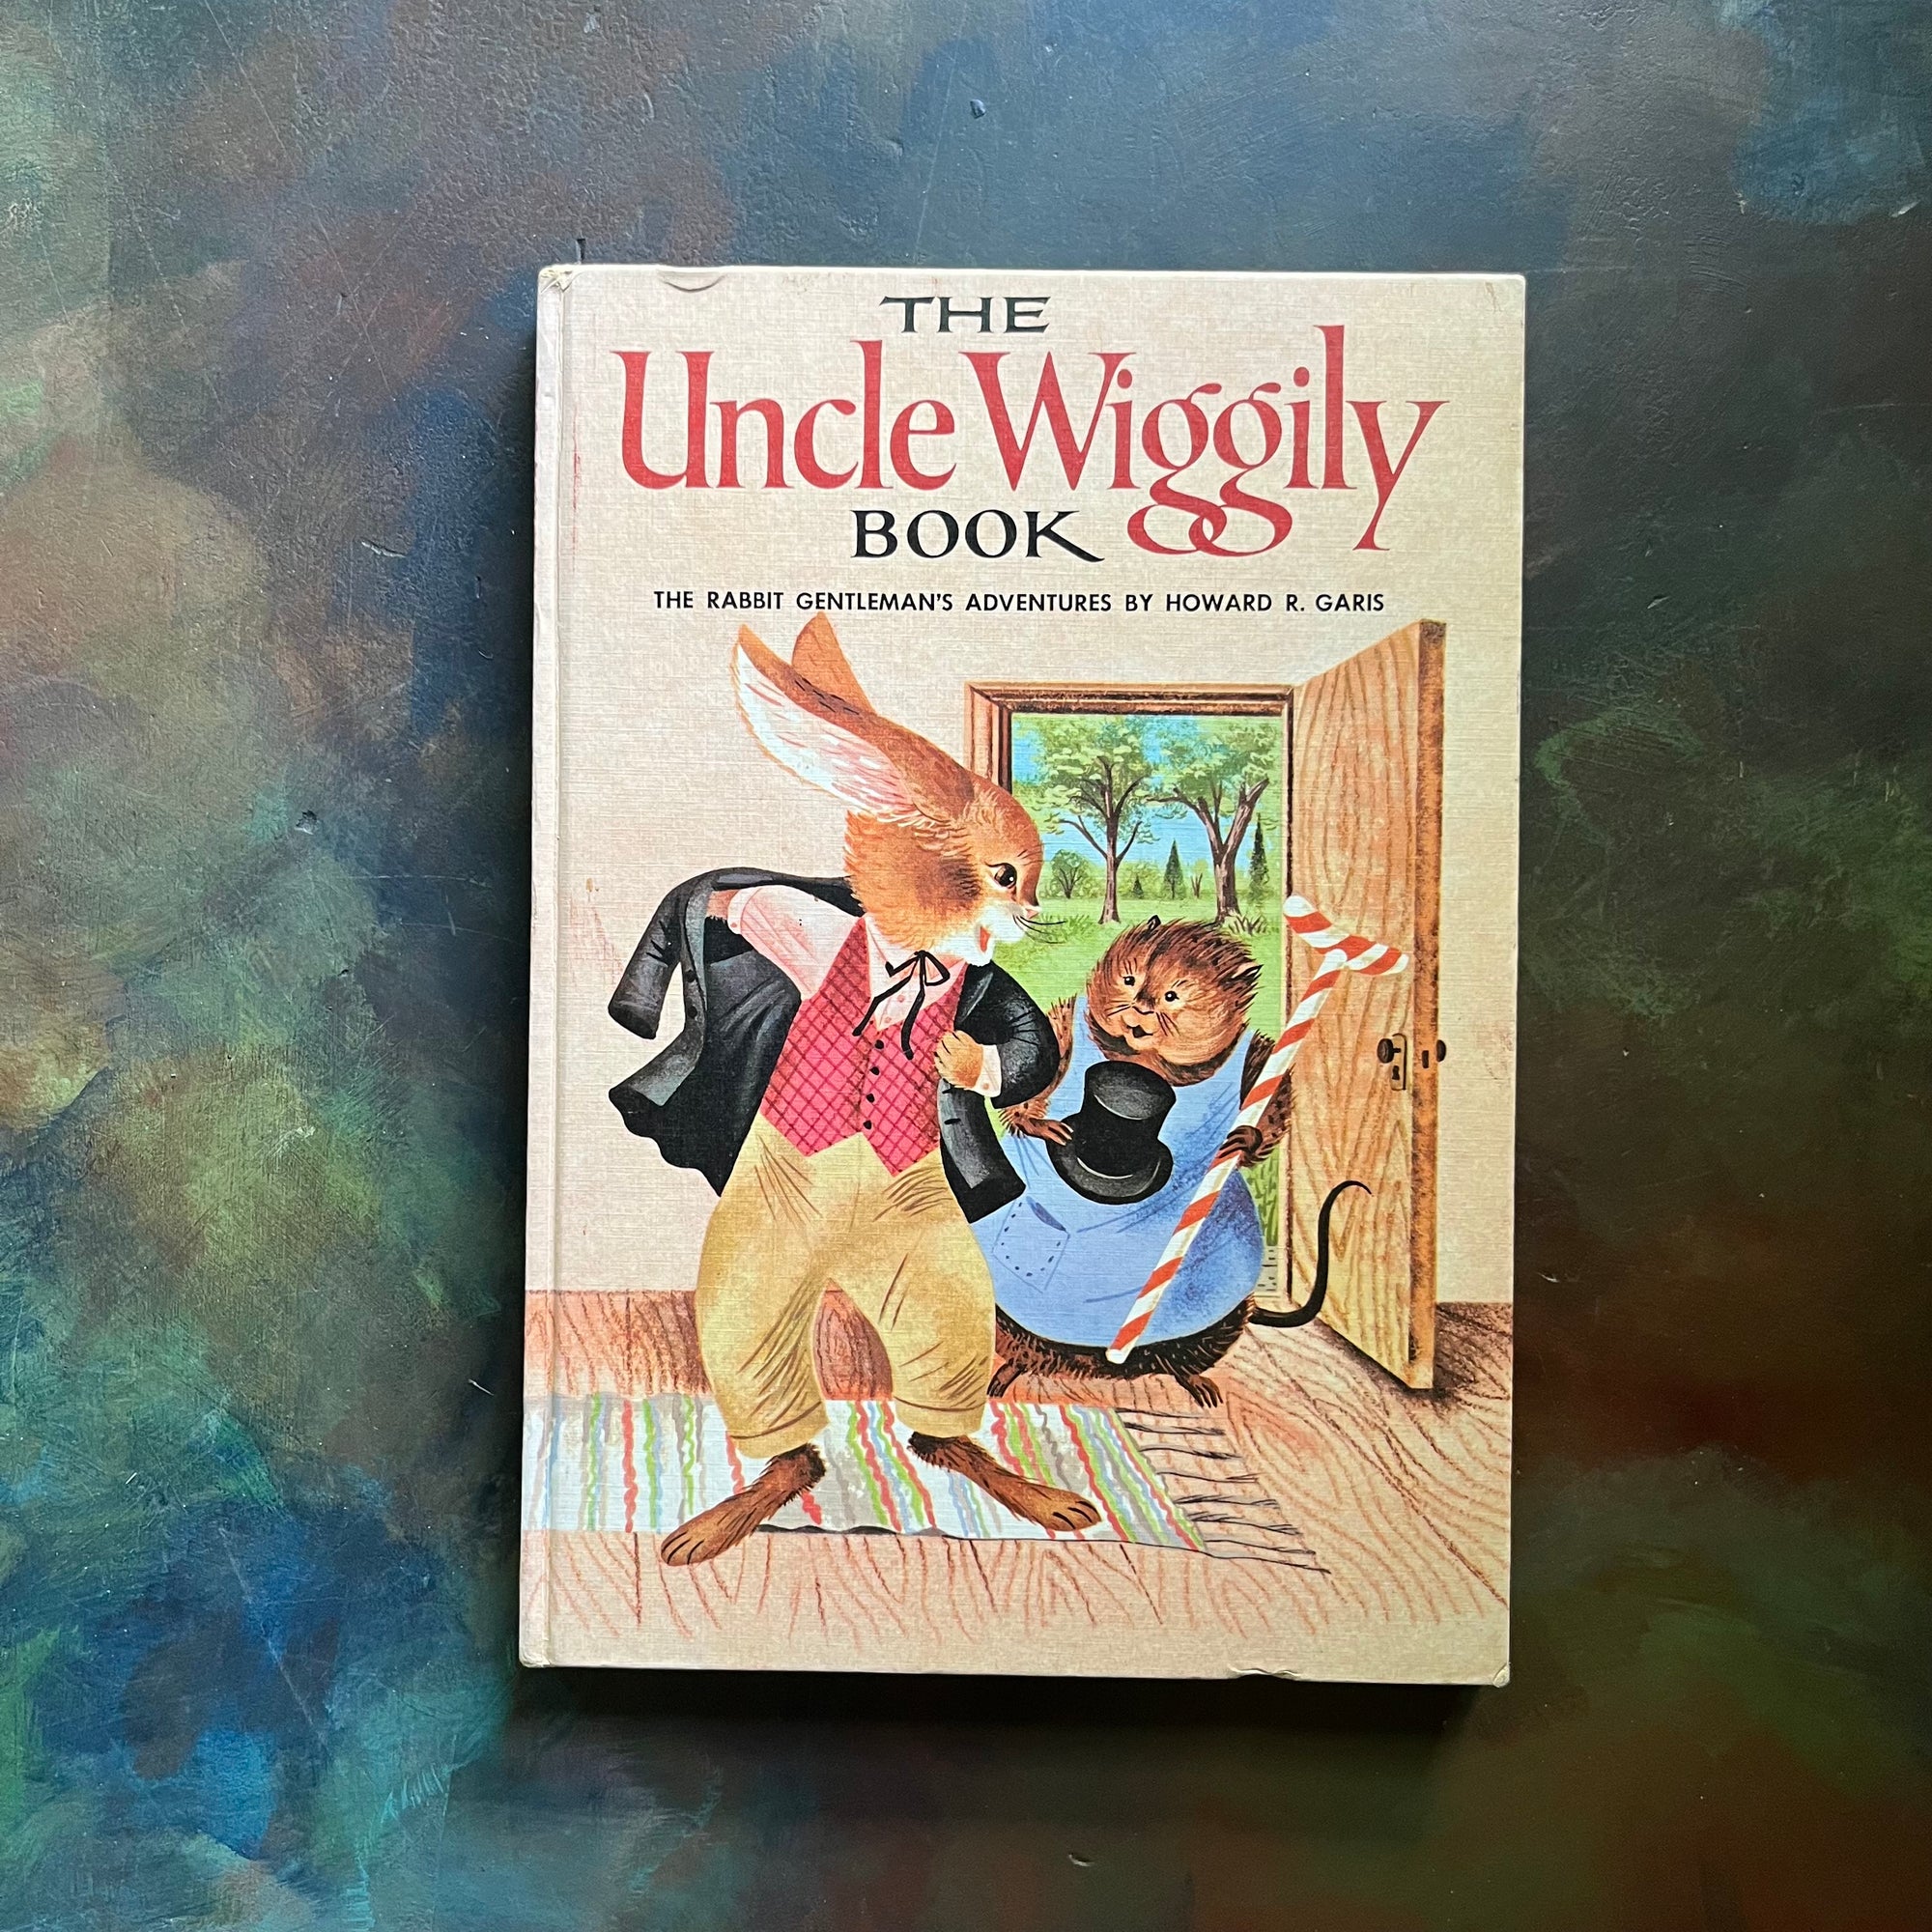 The Uncle Wiggily Book-The Rabbit Gentleman's Adventures by Howard R. Garis-illustrations by Carl & Mary Hauge-vintage children's storybook-view of the front cover